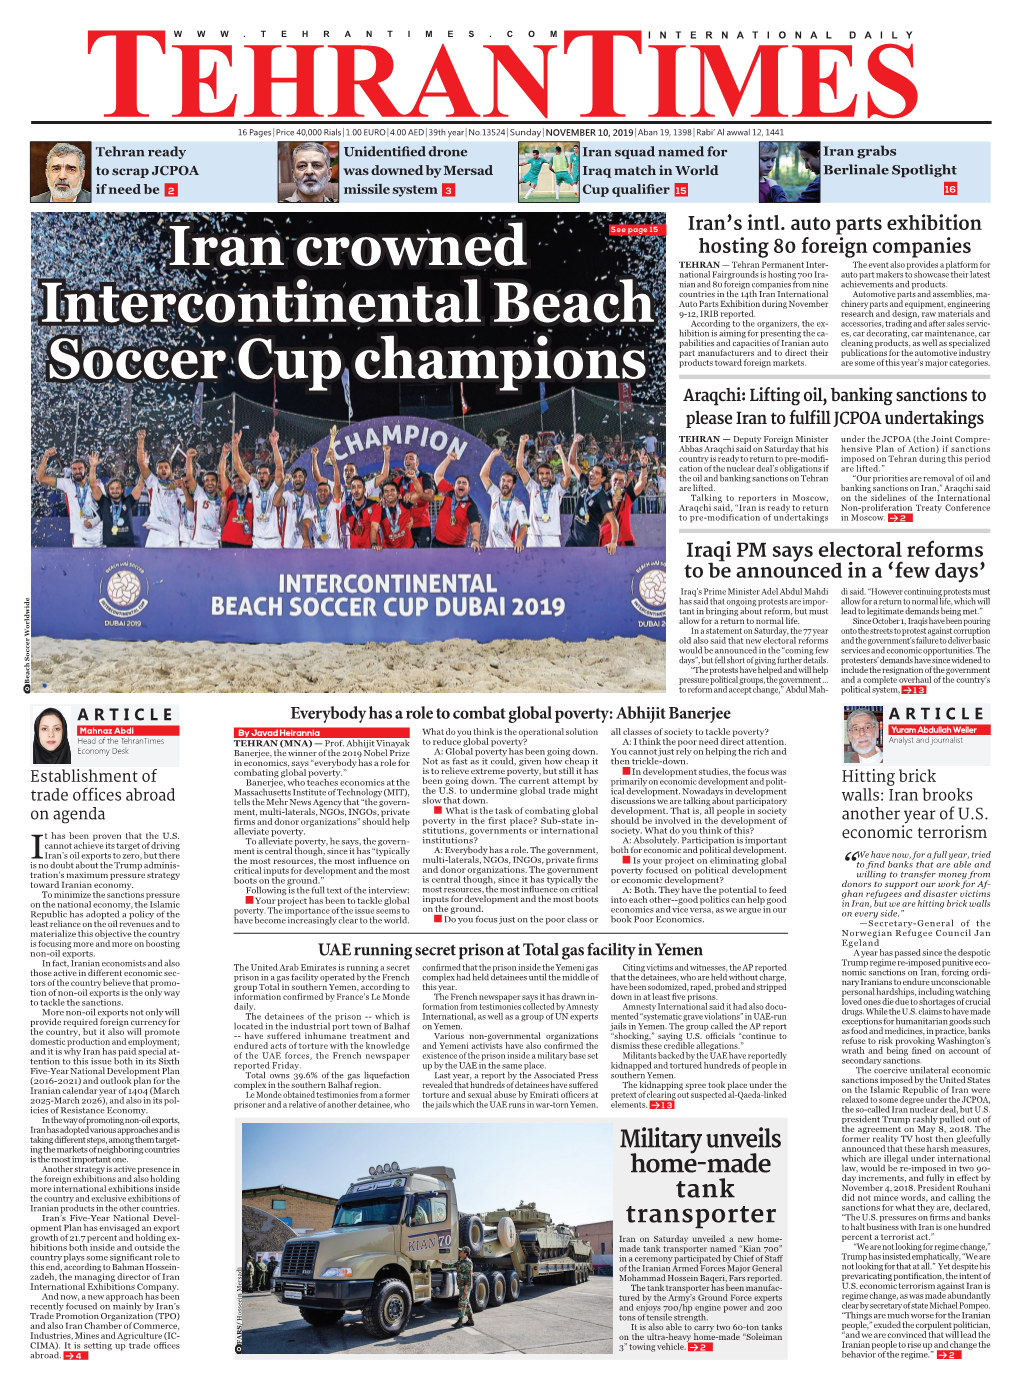 Iran Crowned Intercontinental Beach Soccer Cup Champions